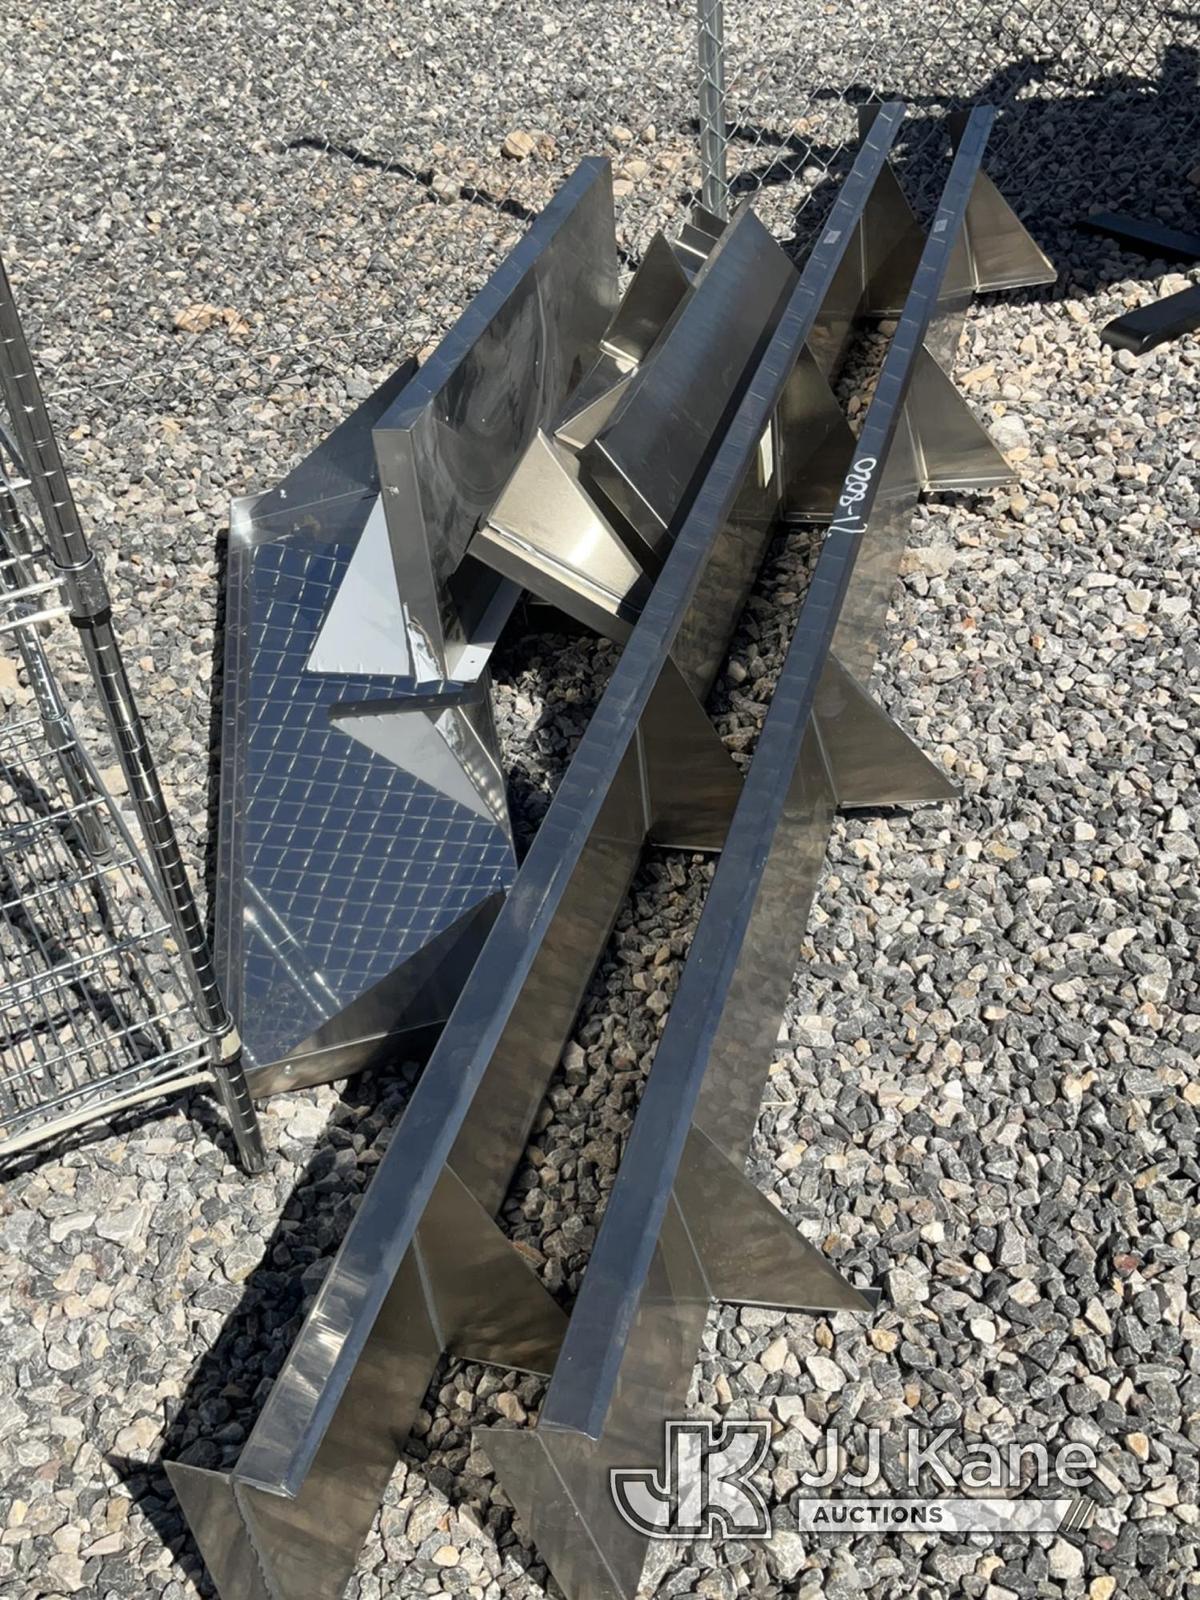 (Las Vegas, NV) Stainless Shelves NOTE: This unit is being sold AS IS/WHERE IS via Timed Auction and